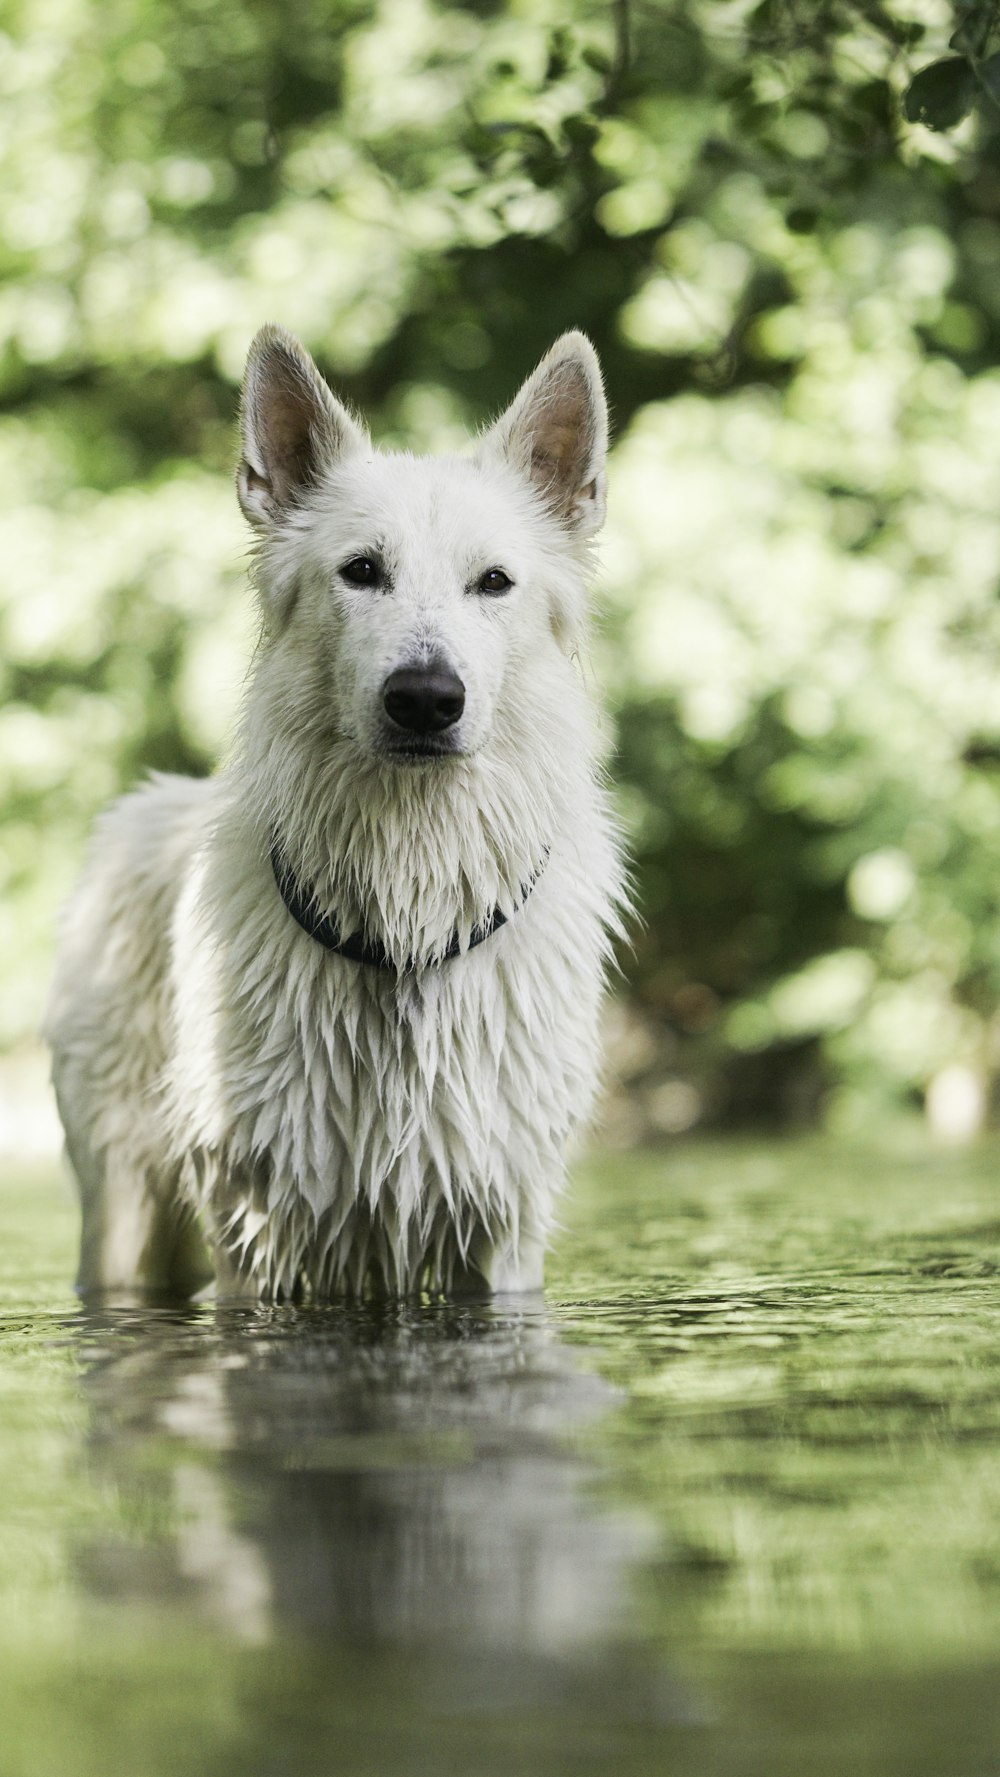 a dog standing in water